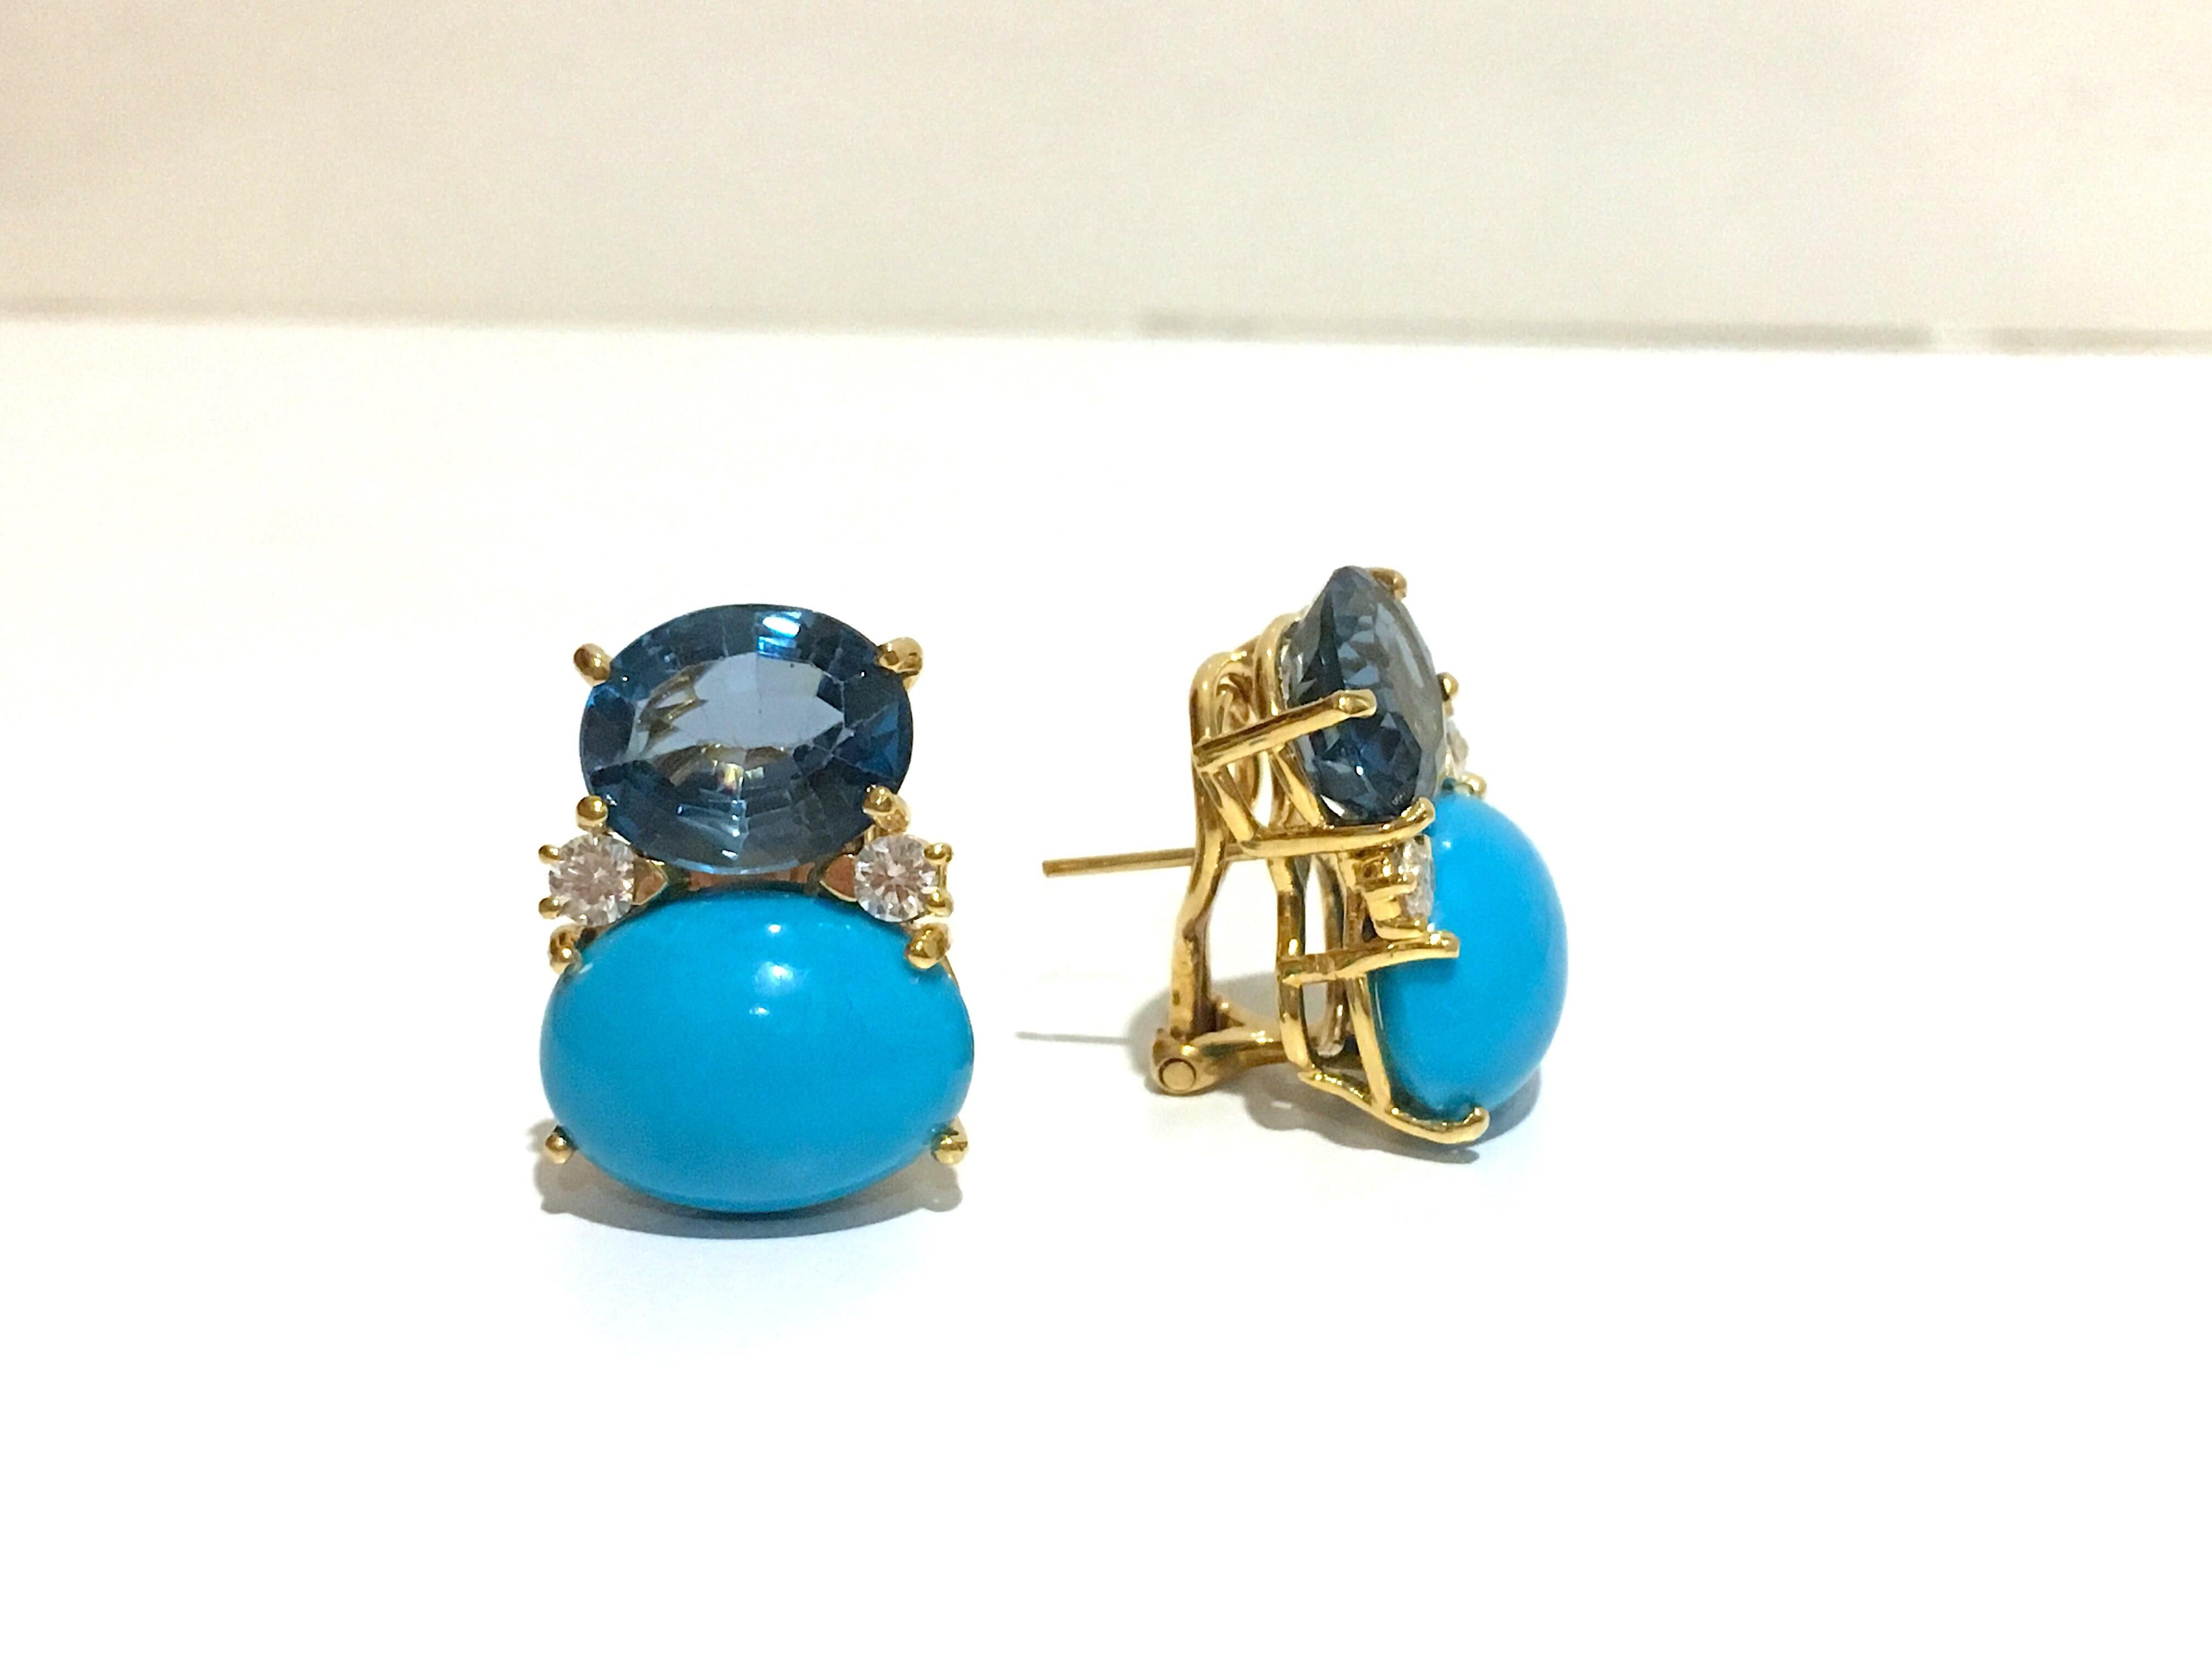 18kt Yellow Gold Large GUM DROP™ Earrings with Blue Topaz and Turquoise and diamonds. 
 
Clip or Pierced

The Blue Topaz is approximately 5 cts each and the Turquoise is approximately 12 cts each, and 4 diamonds weighing approximately 0.60cts

The